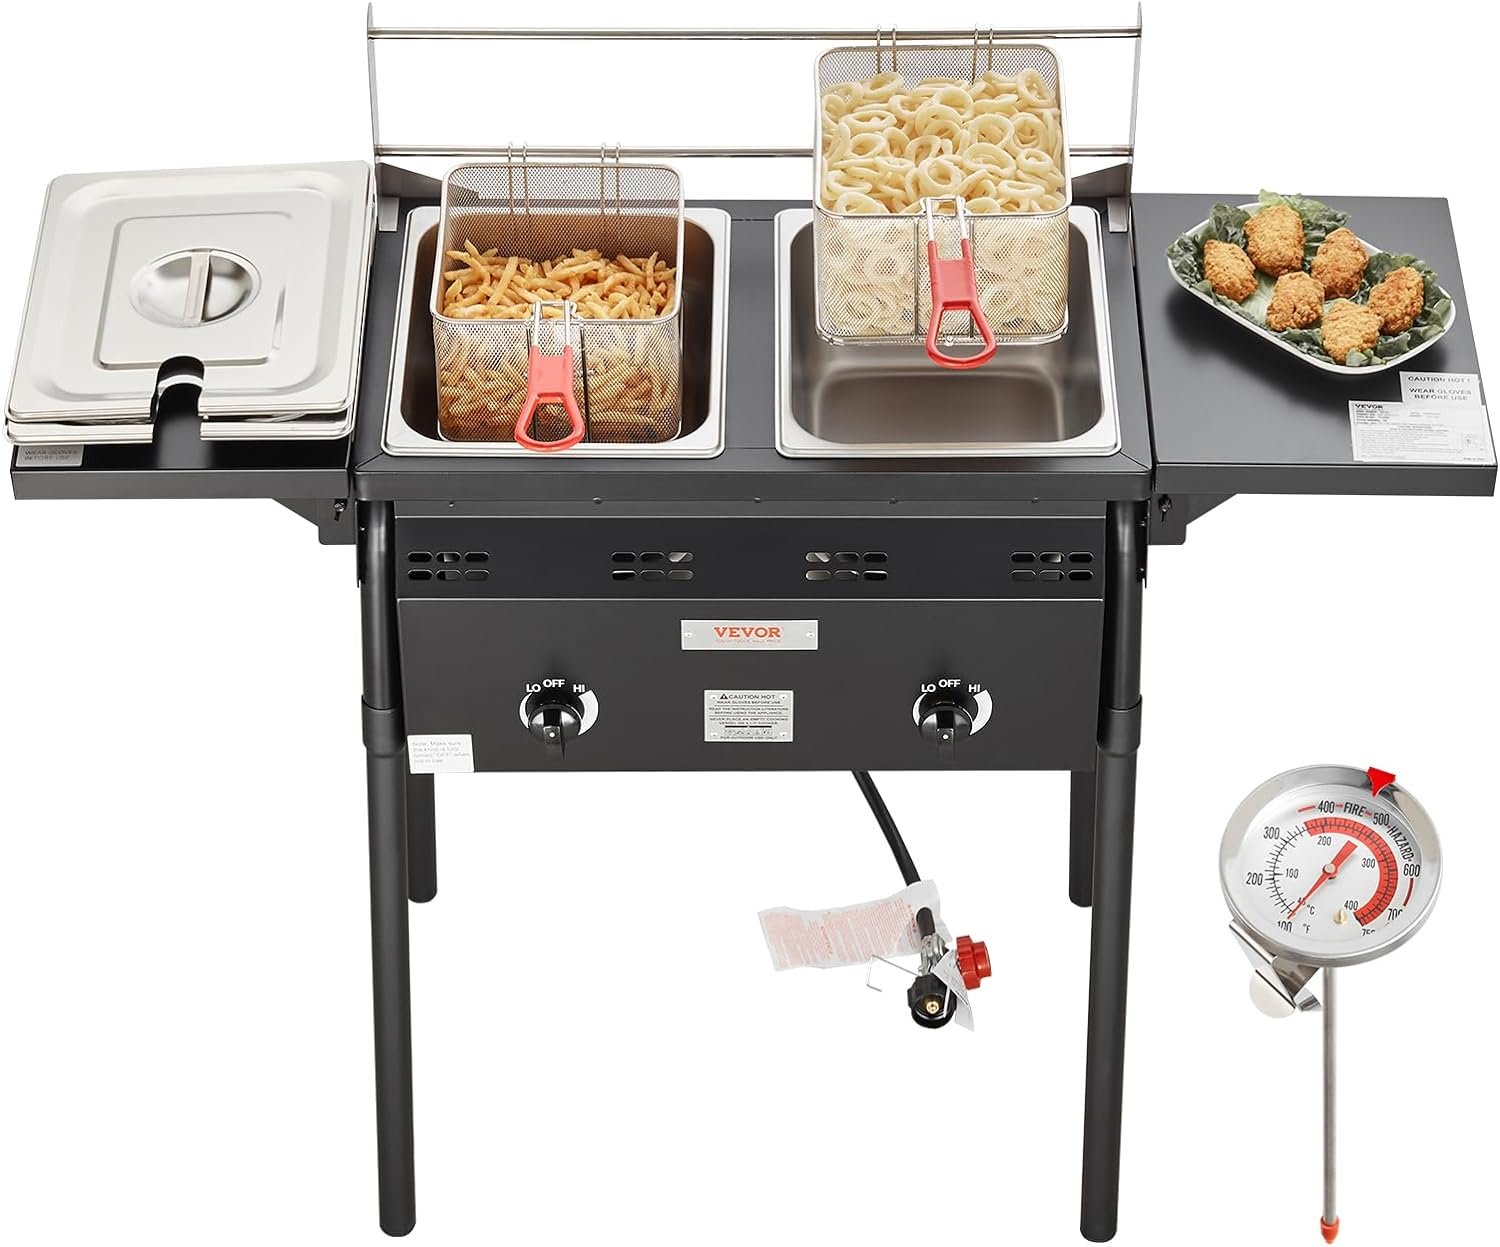 VEVOR Outdoor Propane Deep Fryer, Double Burners Commercial Fryer, 16 Qt Stainless Steel Cooker with Removable Baskets  Lids  Tanks, Oil Fryer Cart with Thermometer  Regulator, For Outdoor Cooking